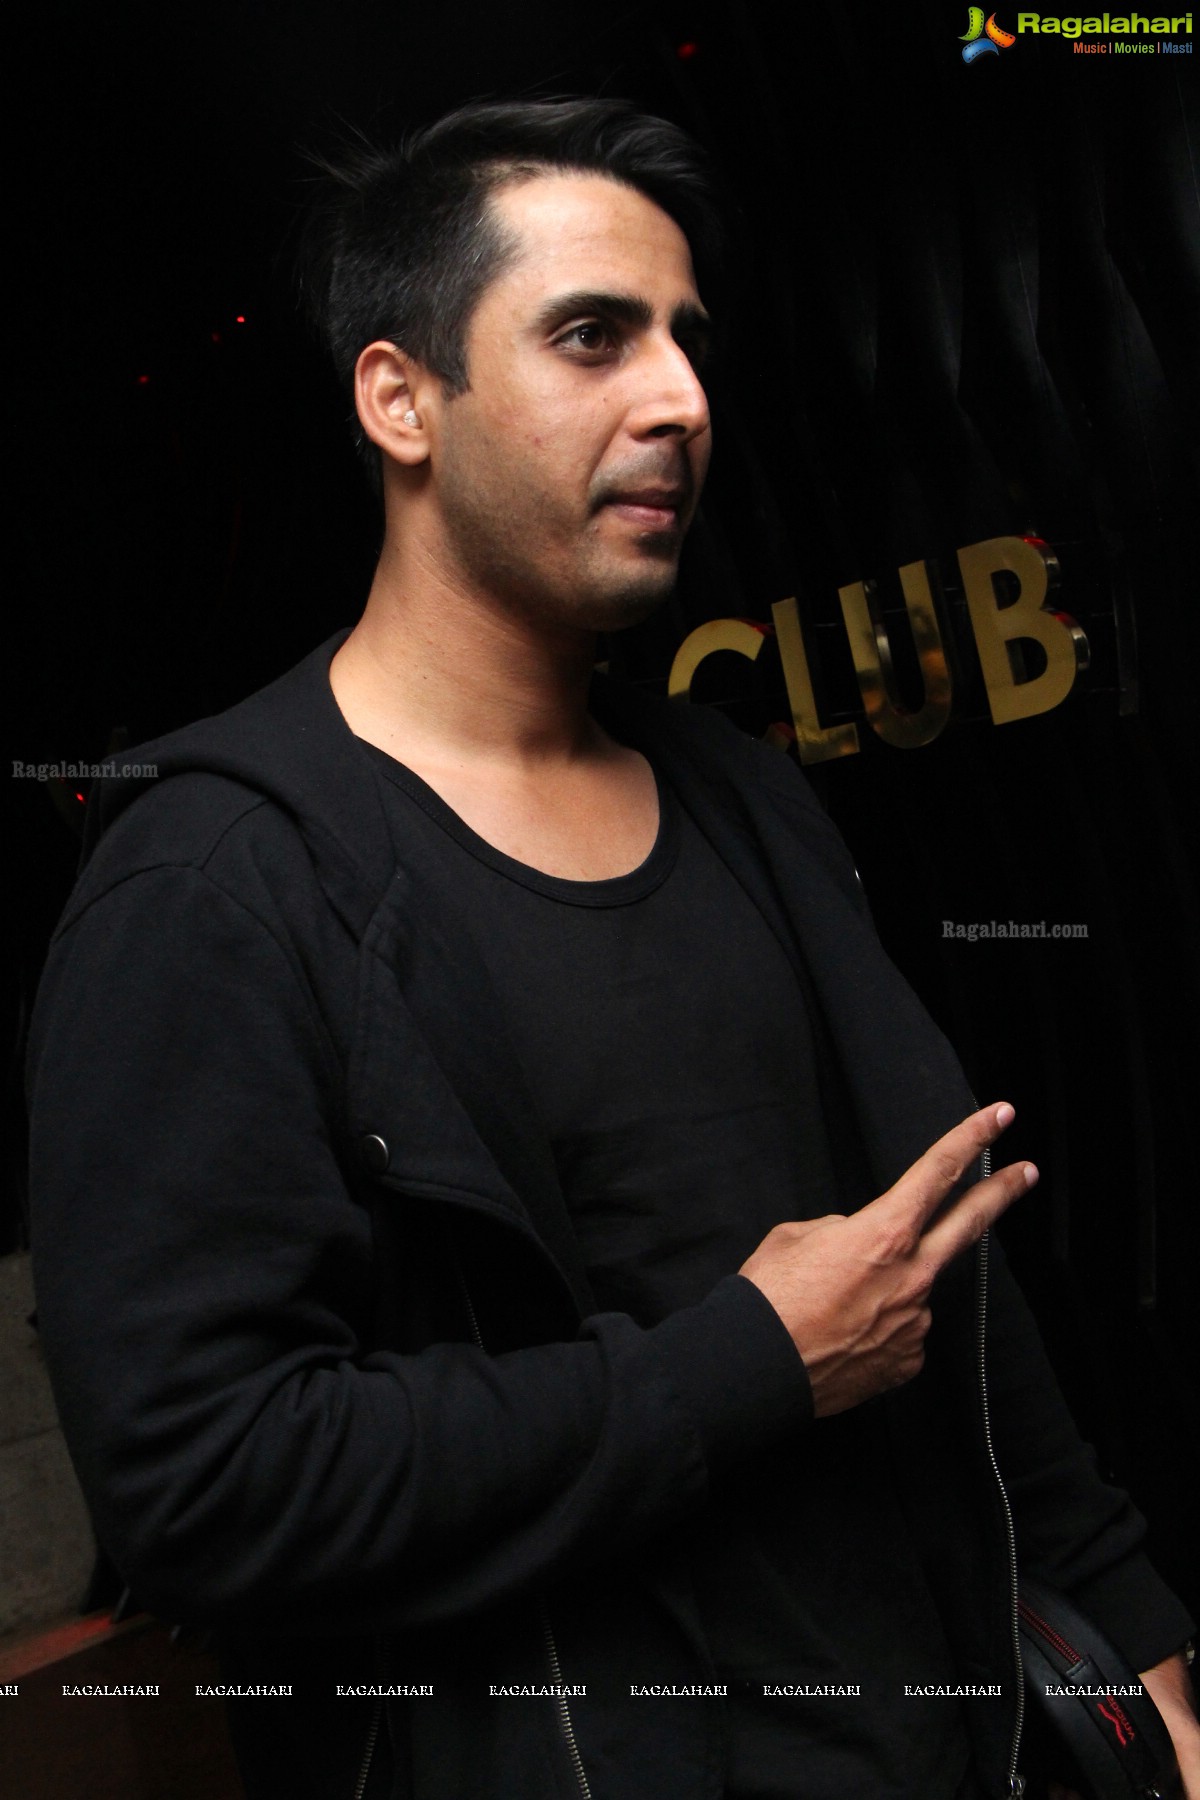 Scale Events Presents - EDM Takeover with Rohan Kapoor at Playboy Club, Hyderabad